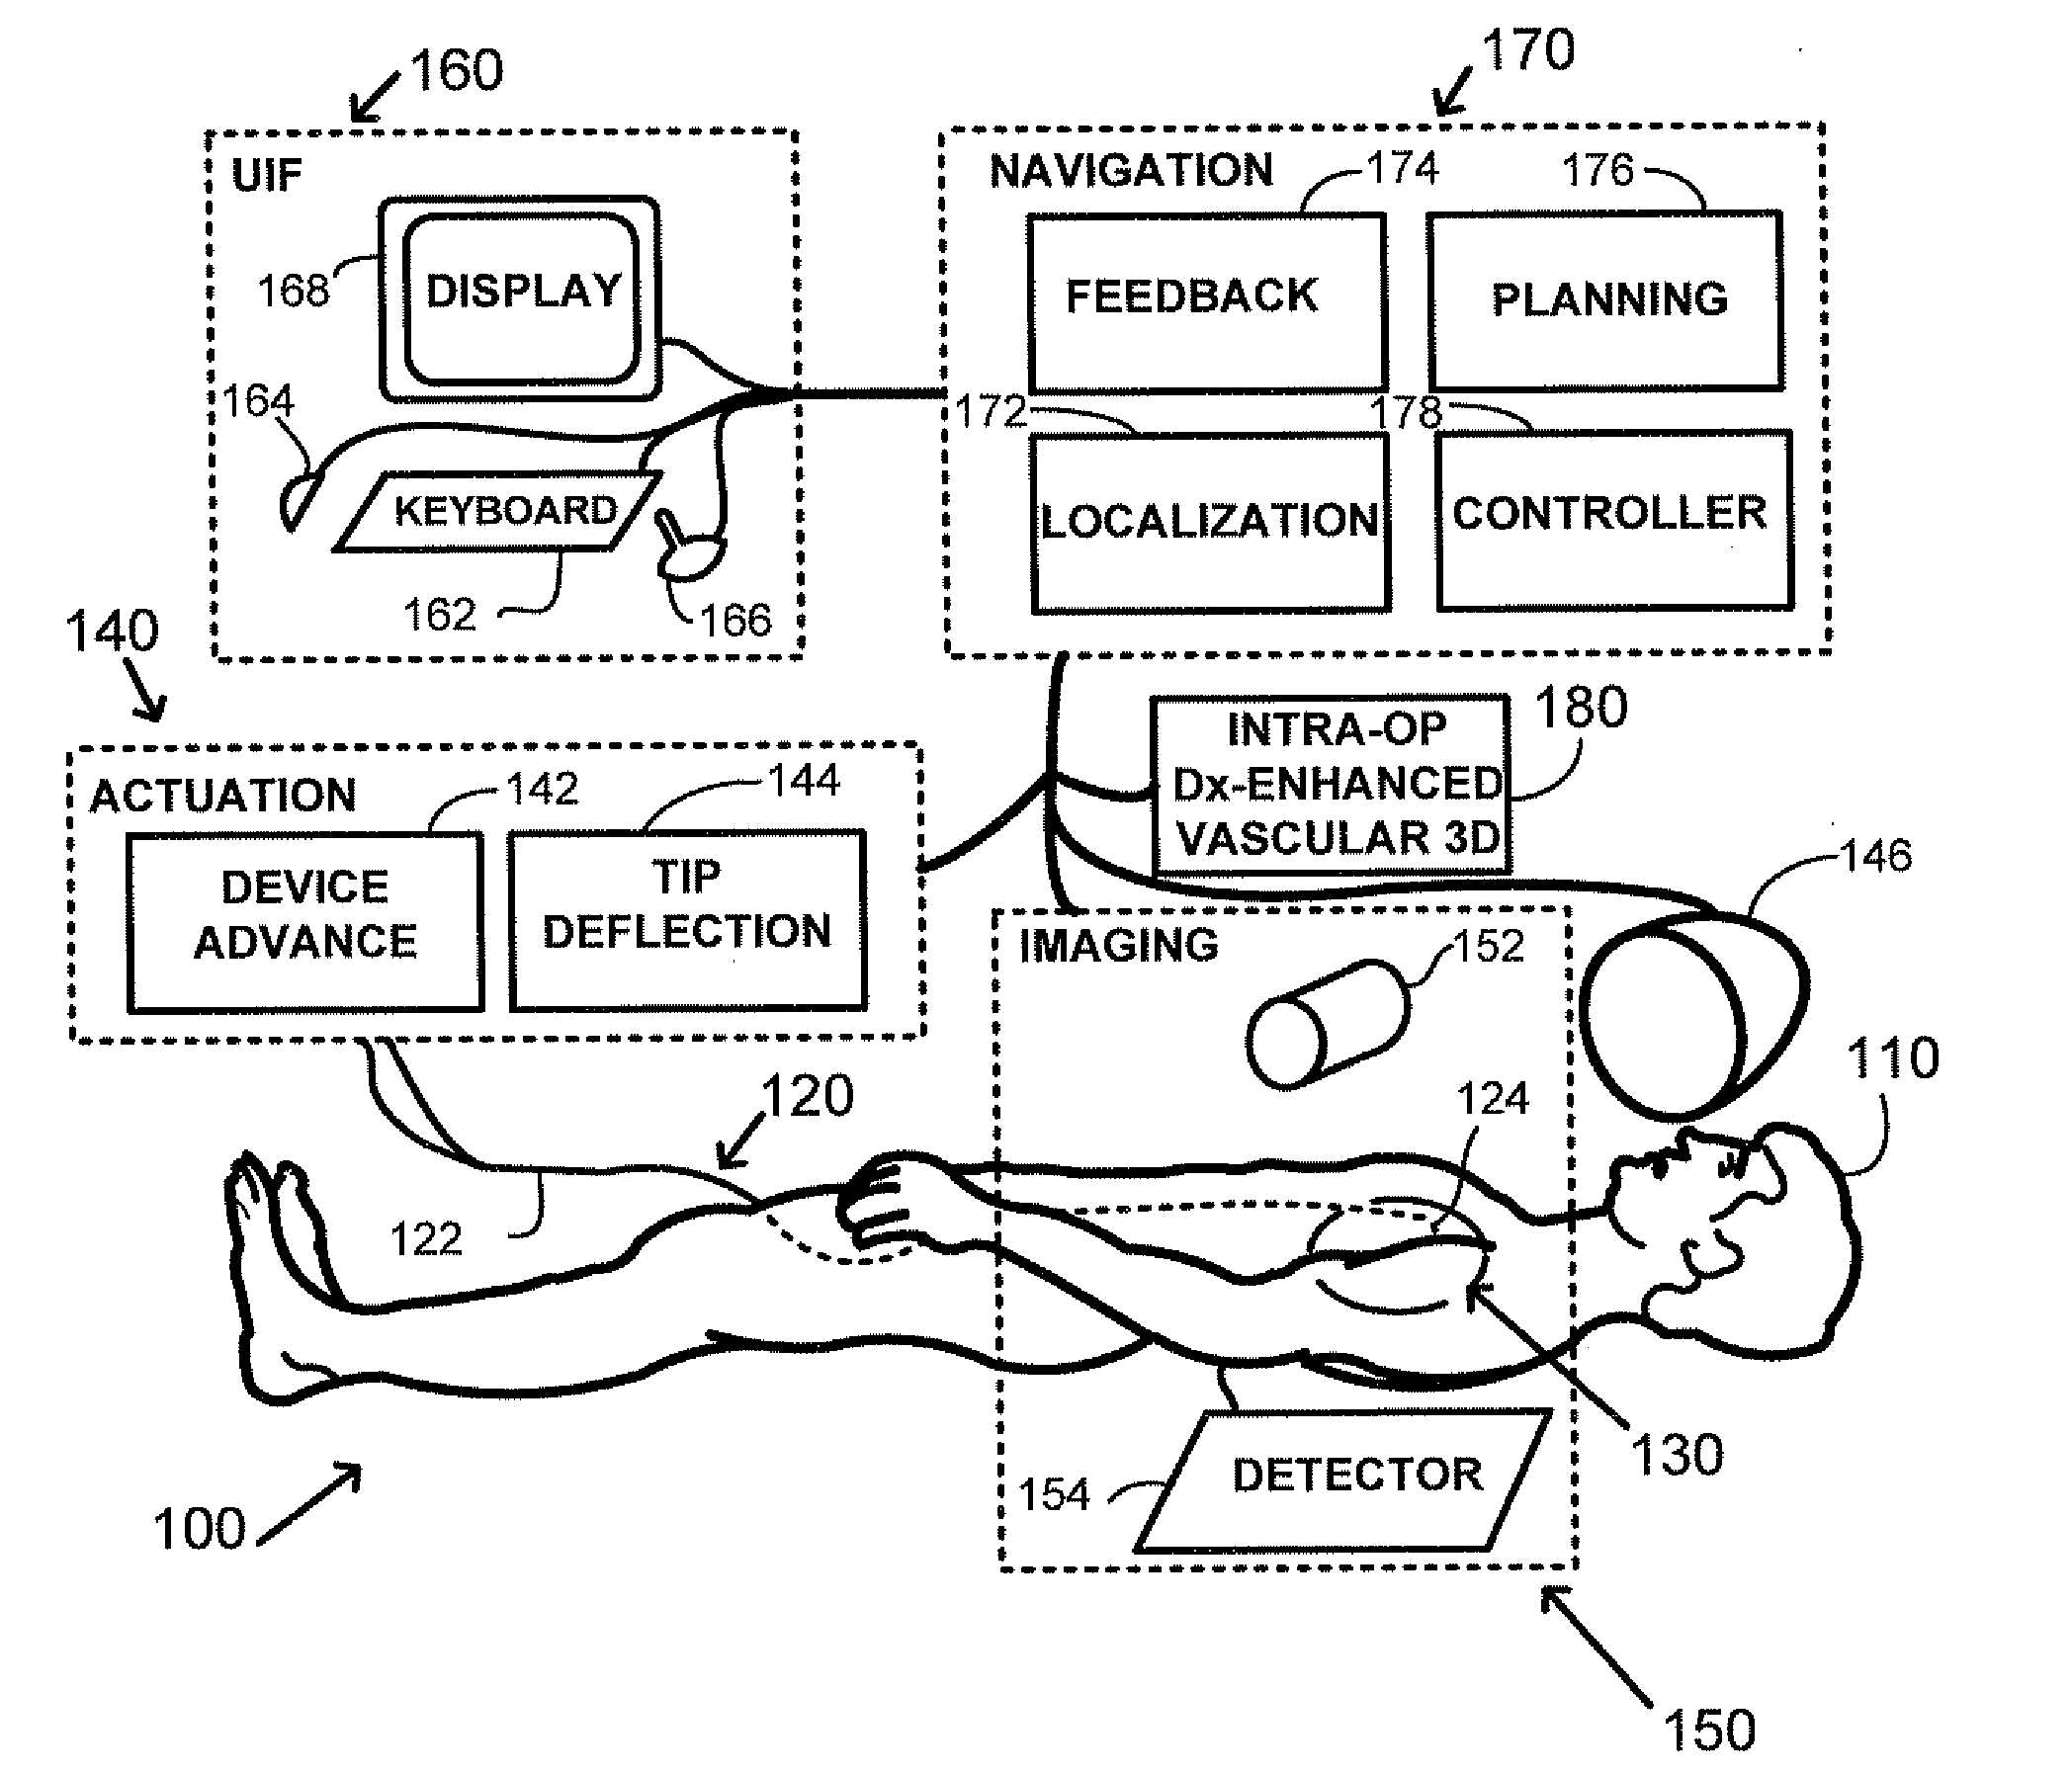 Method and apparatus for remotely controlled navigation using diagnostically enhanced intra-operative three-dimensional image data